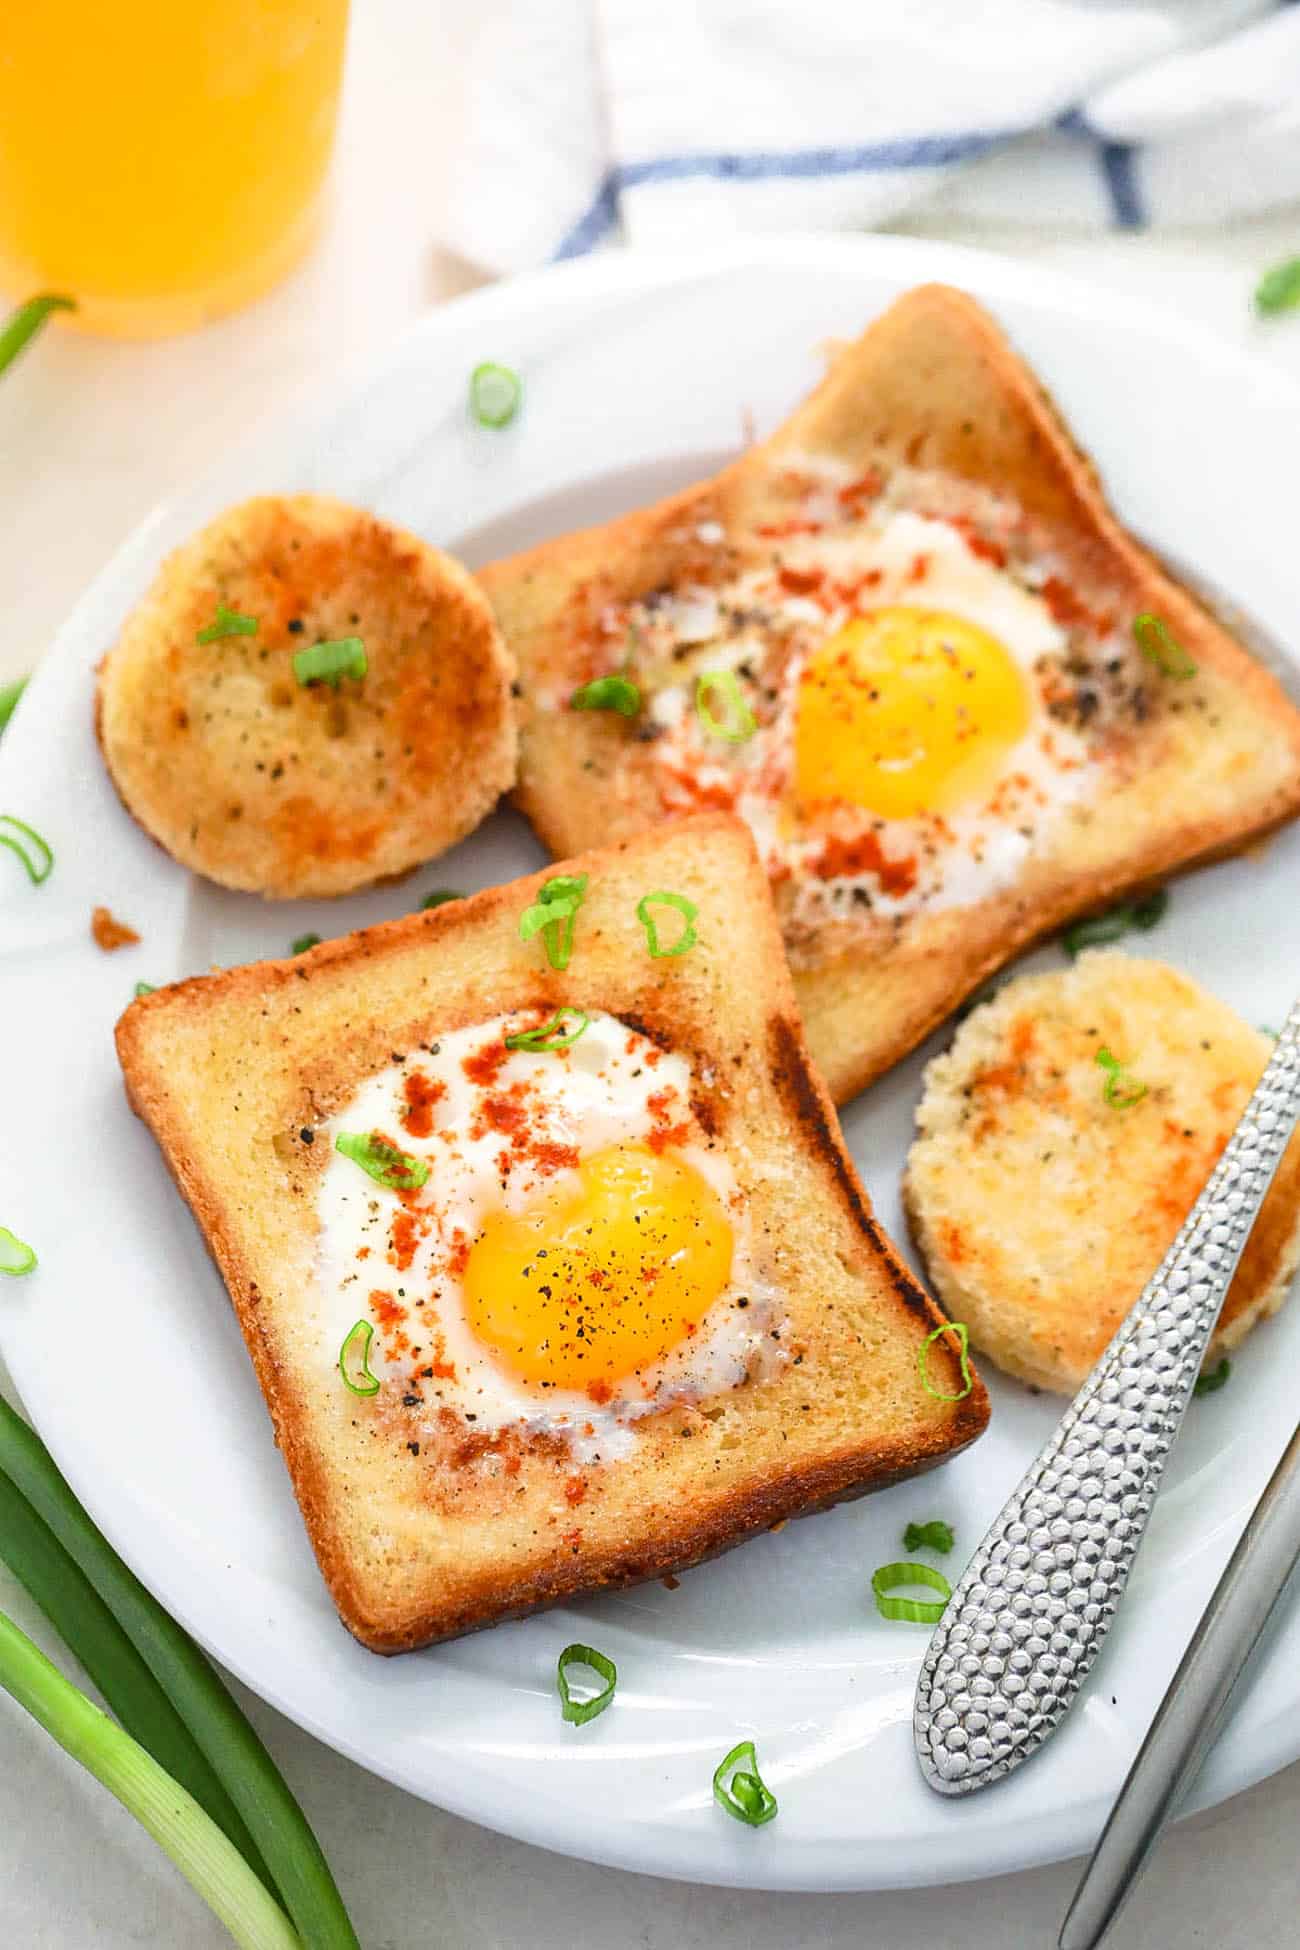 eggs in a basket - a classic vegetarian breakfast served on a white plate